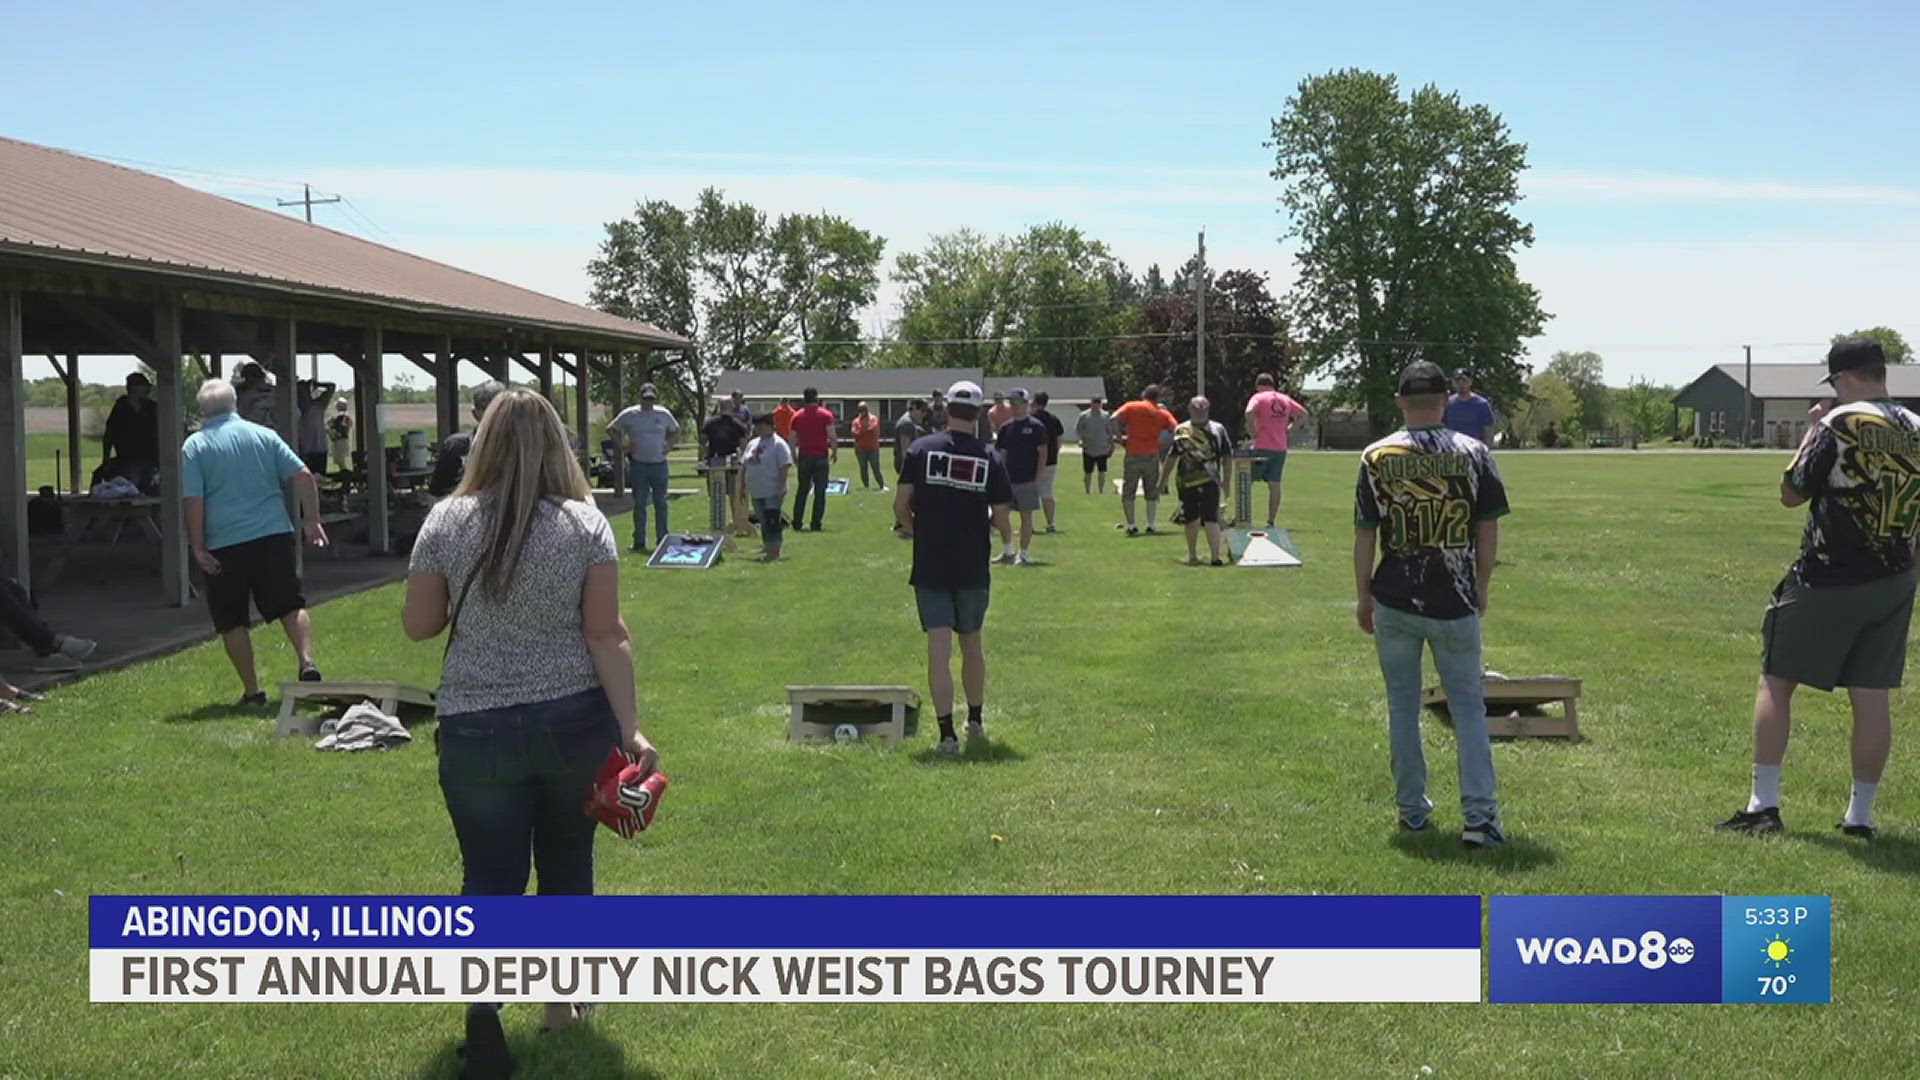 Proceeds from the bags tournament were donated to the Deputy Nick Weist Memorial Scholarship Fund, which supports high schoolers interested in law enforcement.